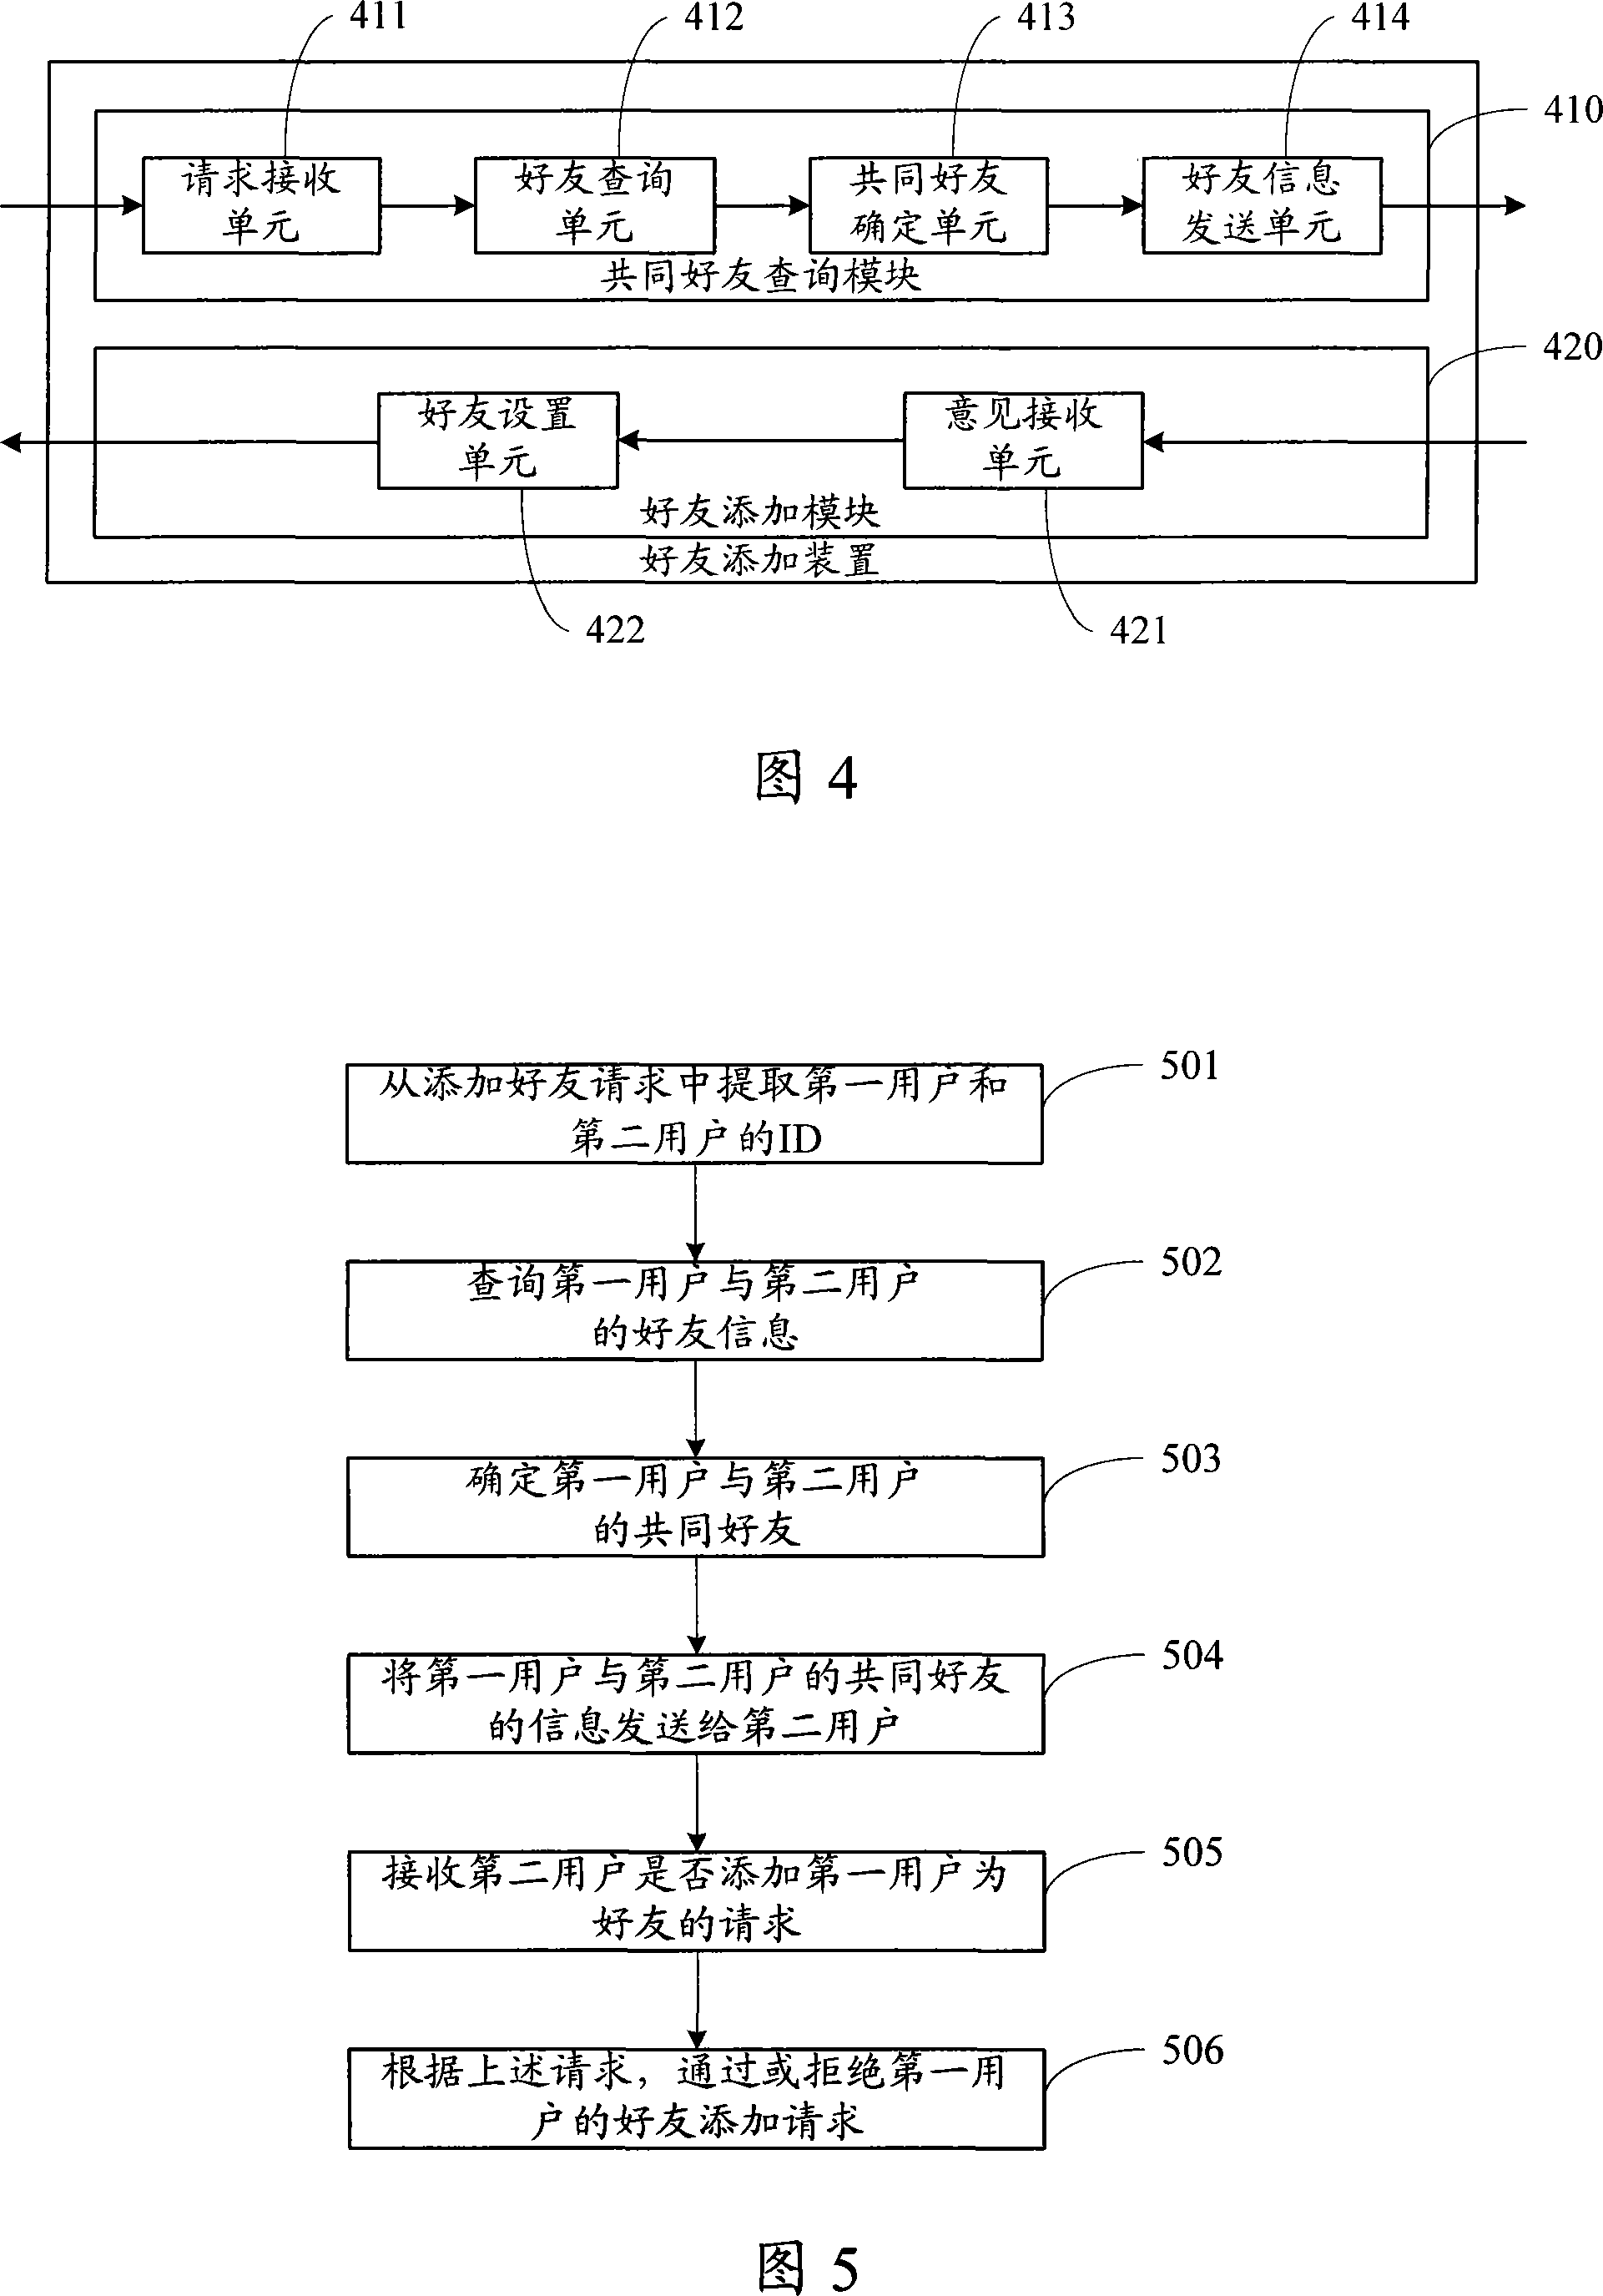 Friend addition device and method